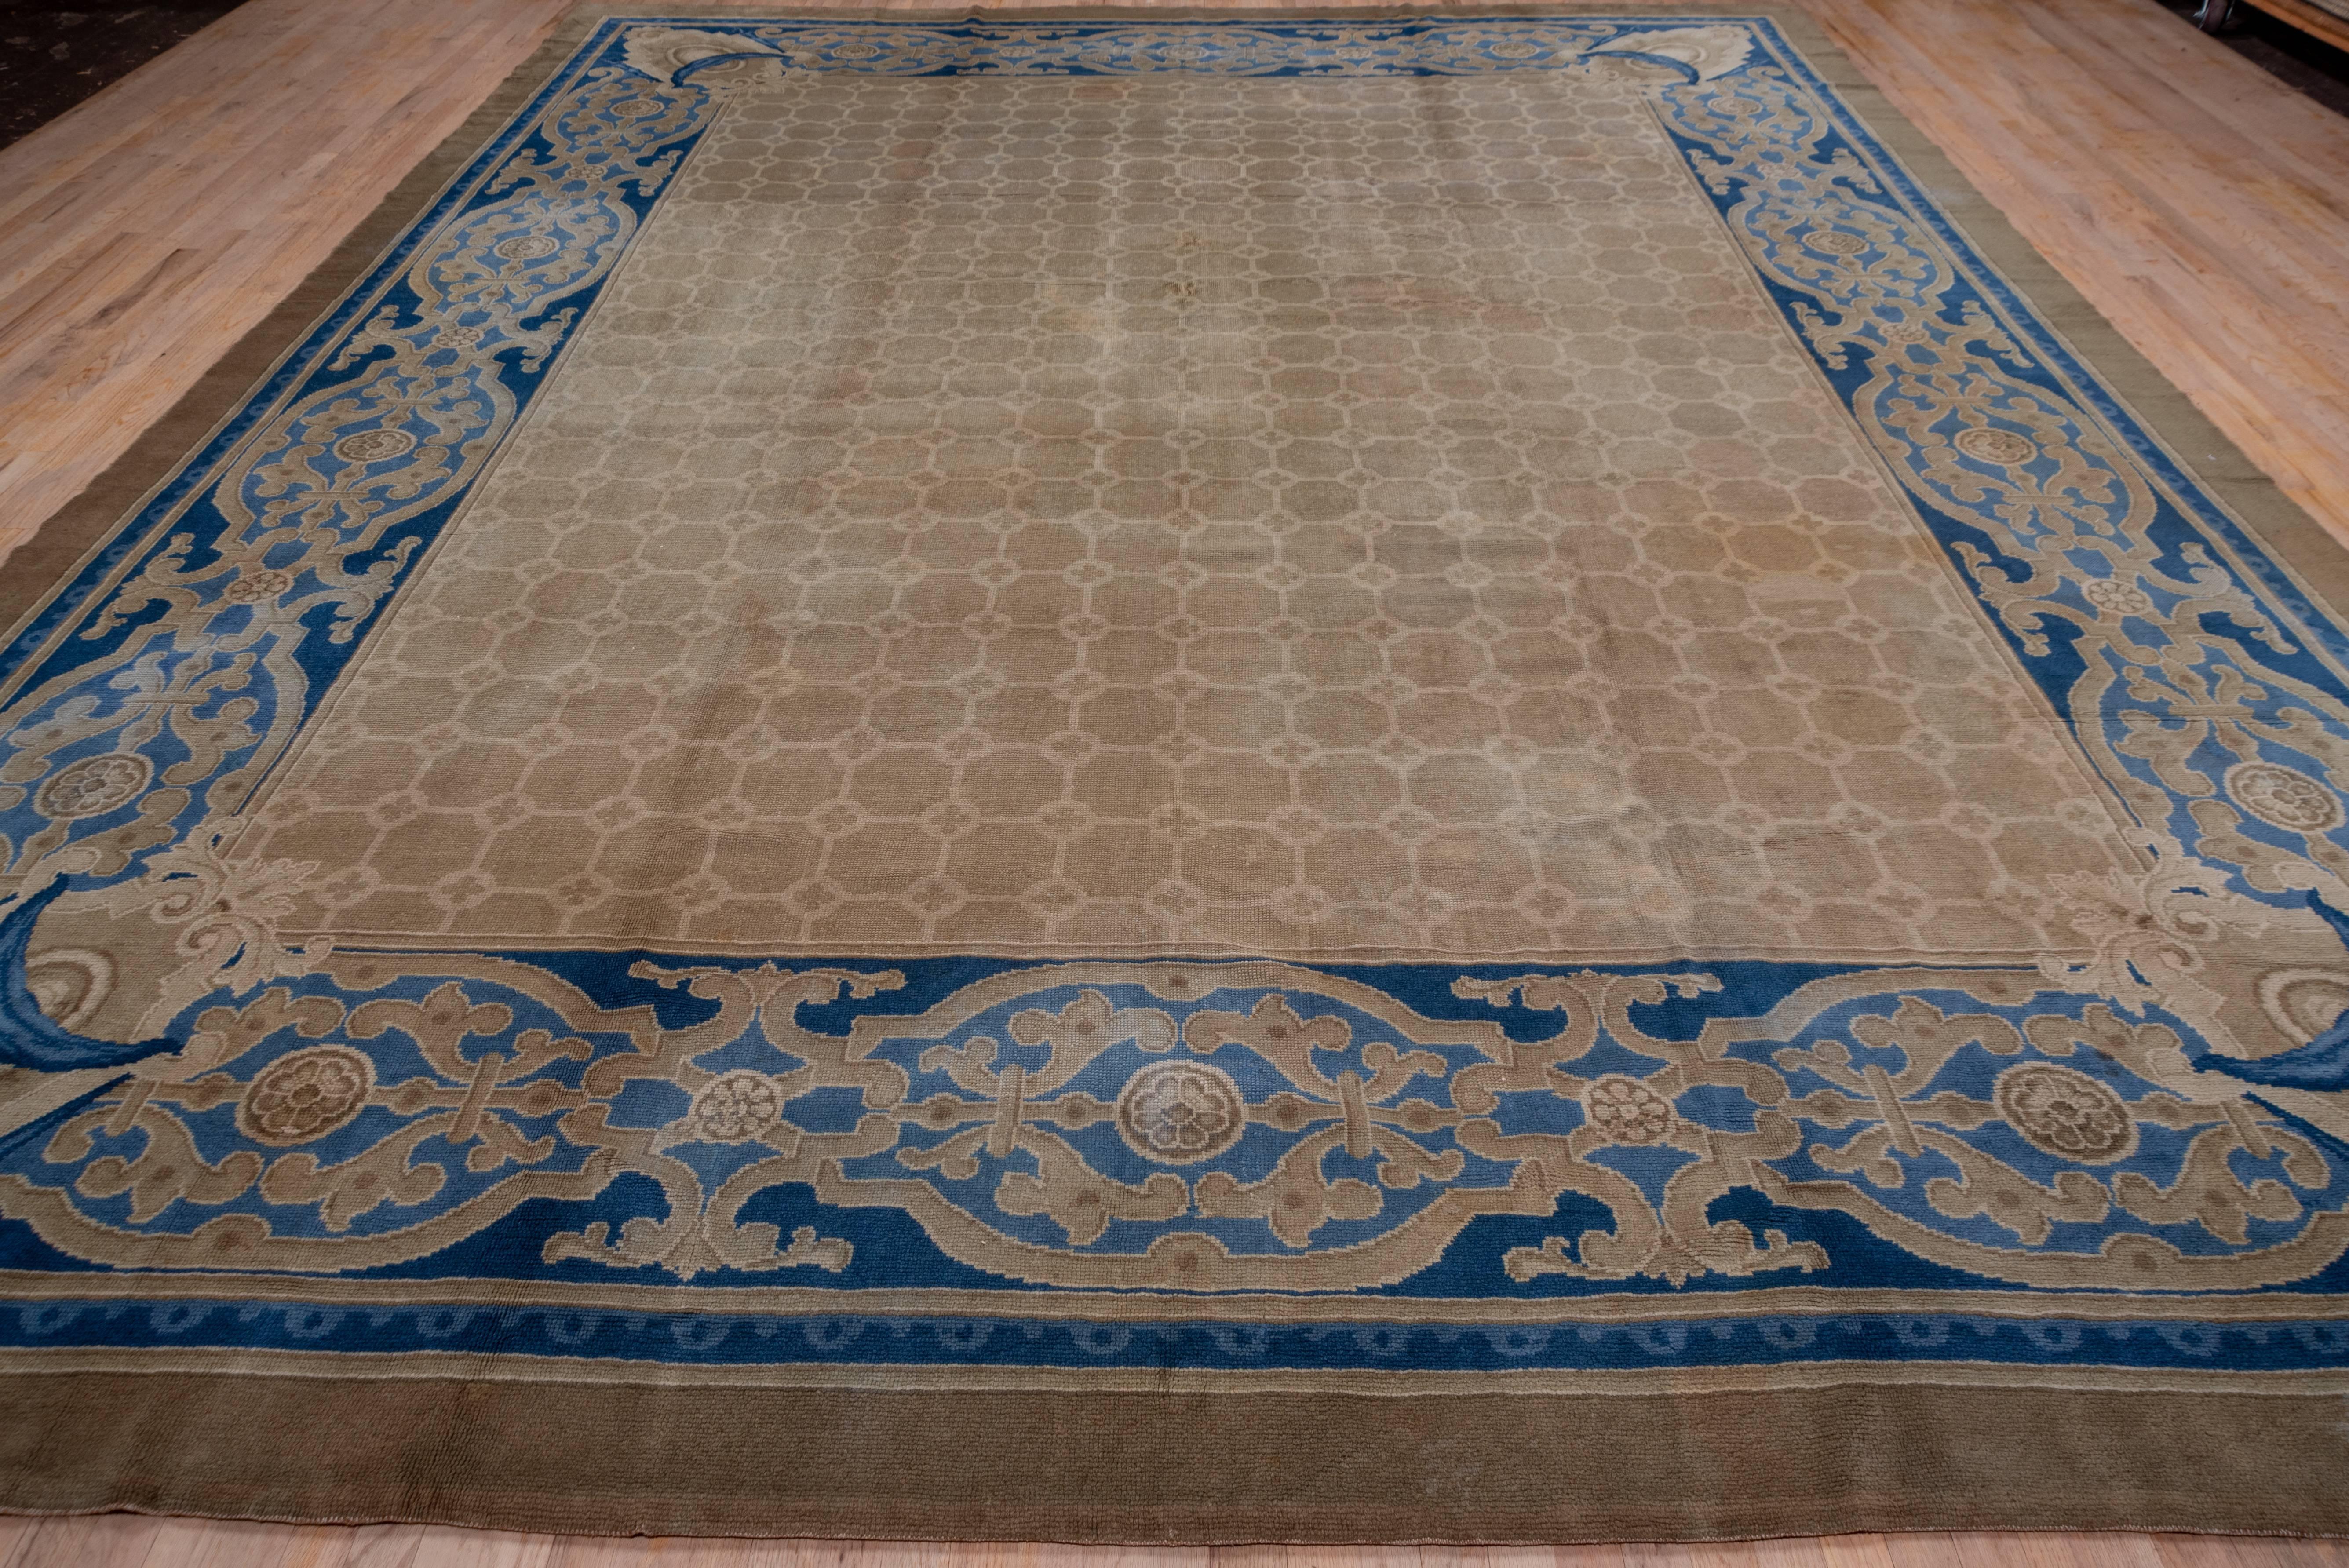 This thick pile carpet has a tan field with a small all-over repeating pattern of fat eight pointed brown tiles on the beige-tan field. A blue-slate border of joined cartouches with contoured strapwork makes an appropriate frame. The drapery swag